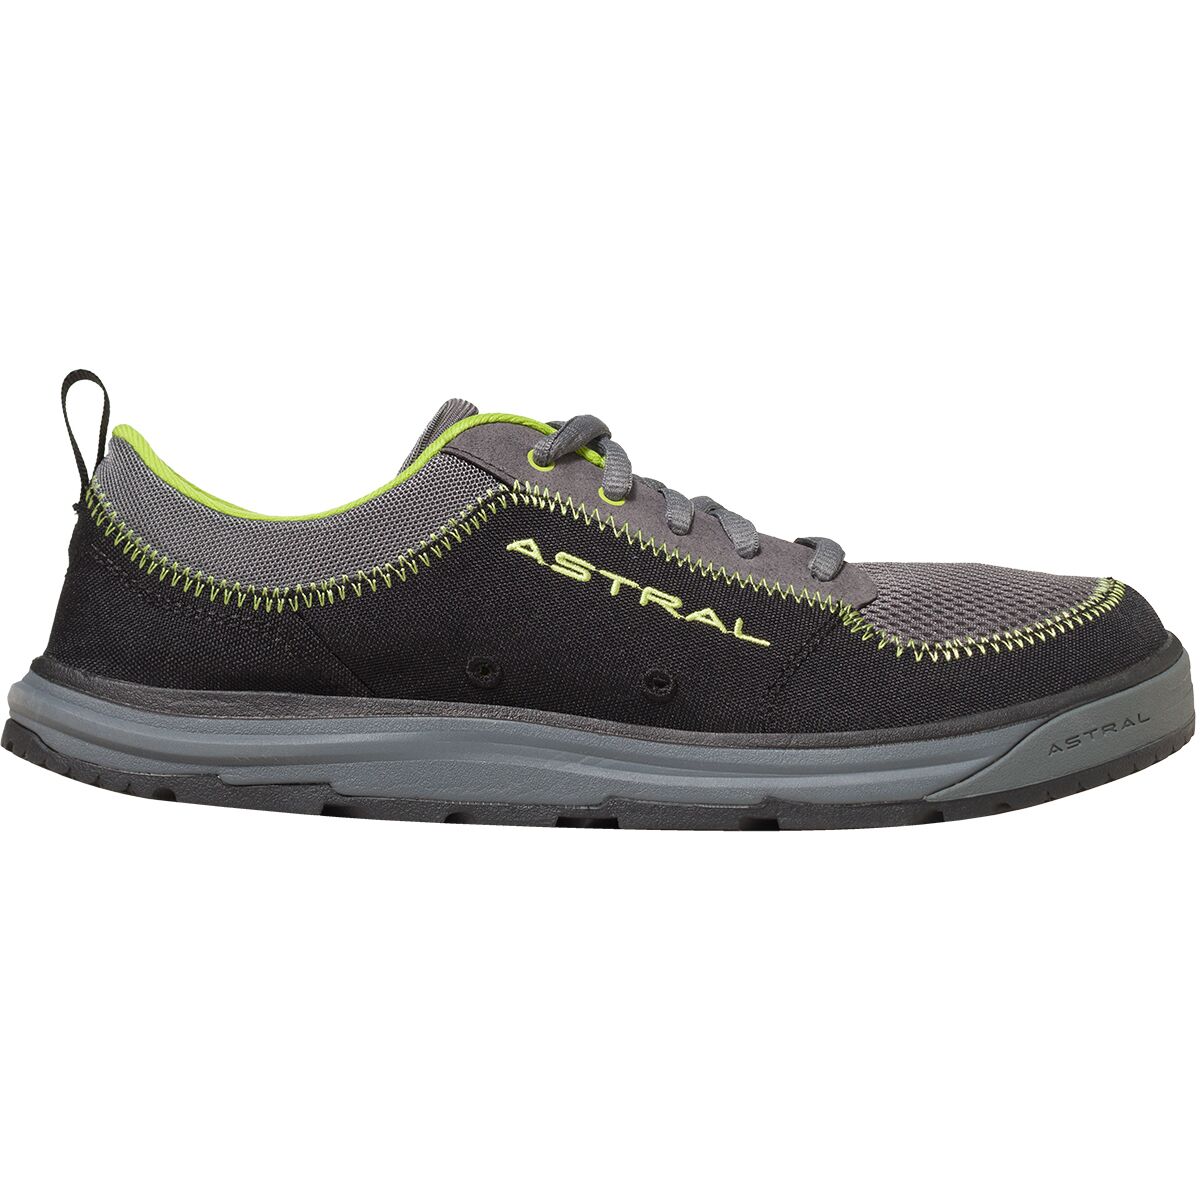 Astral Brewer 2 Water Shoe - Men's